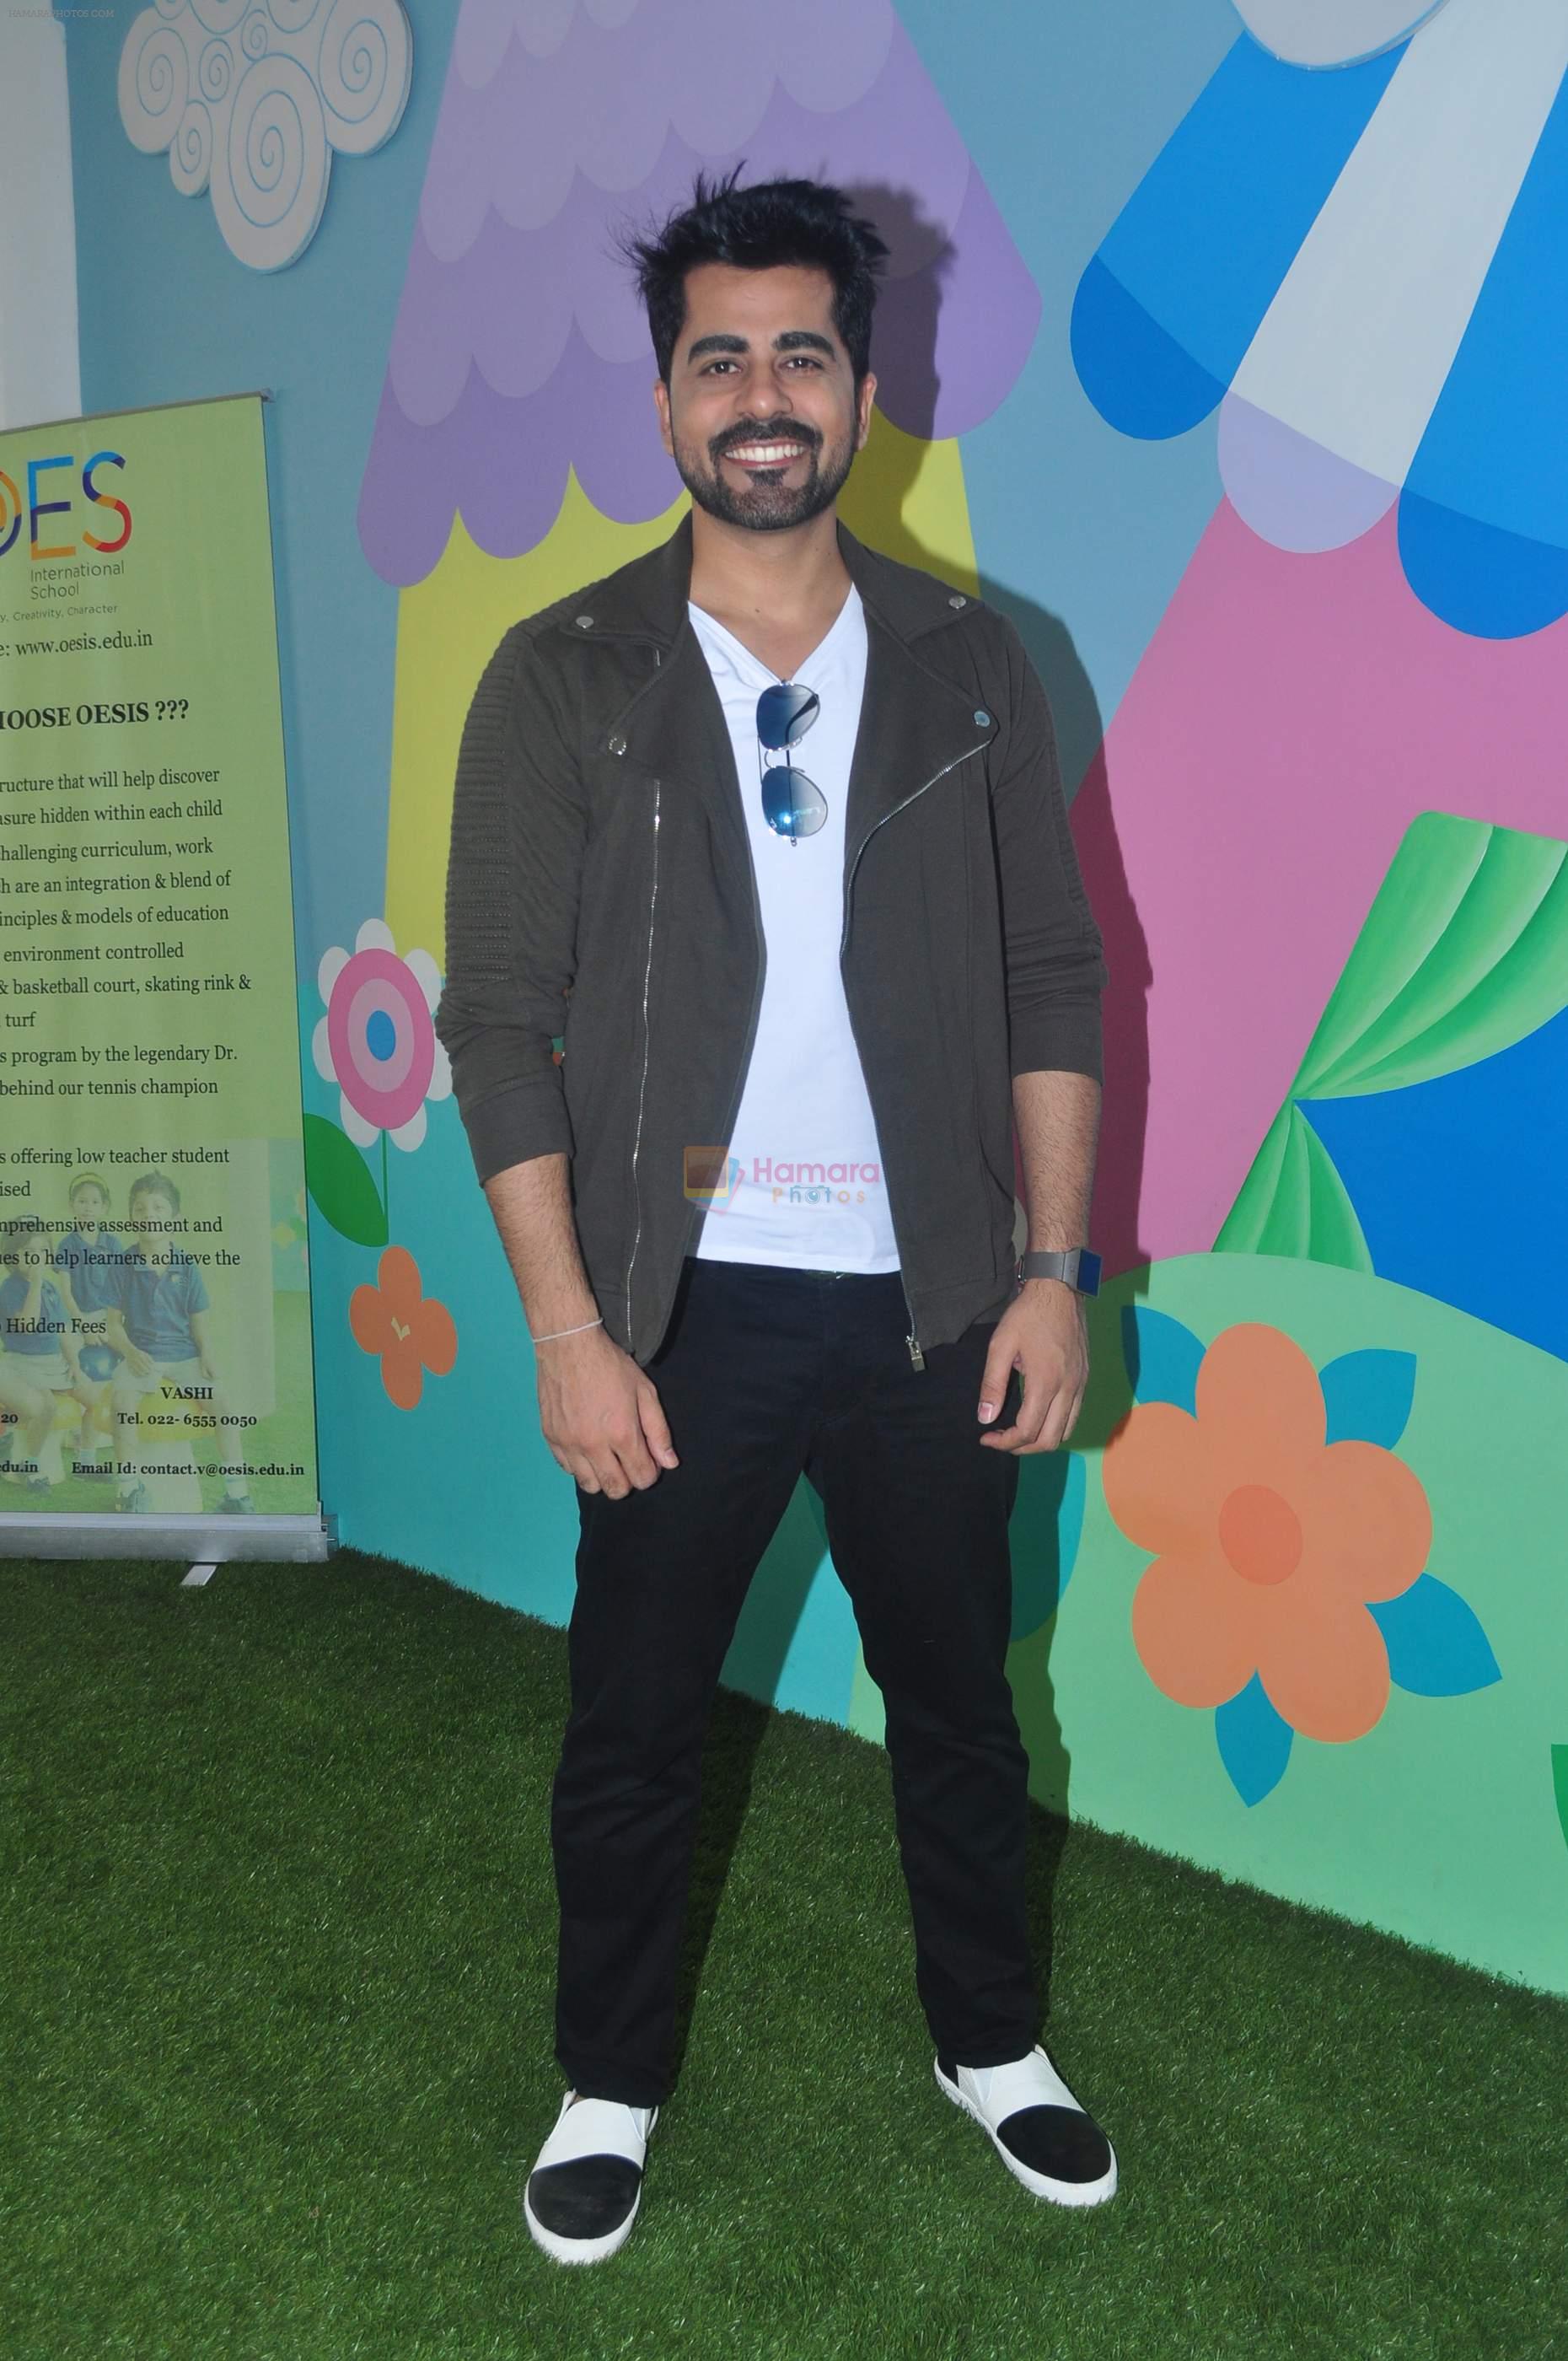 at a charity event on 3rd March 2016